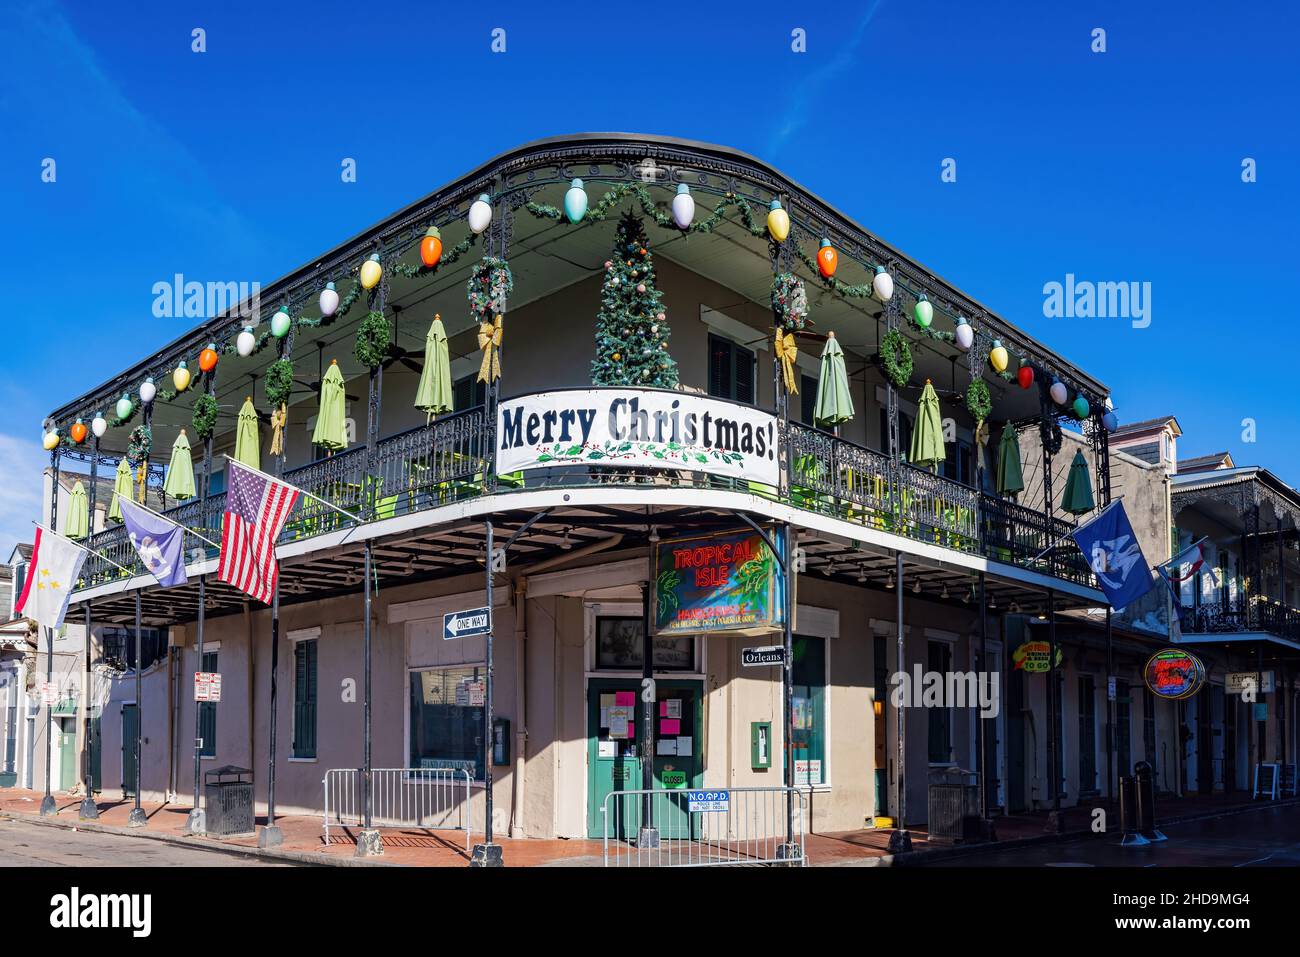 Louisiana, DEC 24 2021 - Daytime view of the beautiful Tropical Isle bar at French Quarter Stock Photo